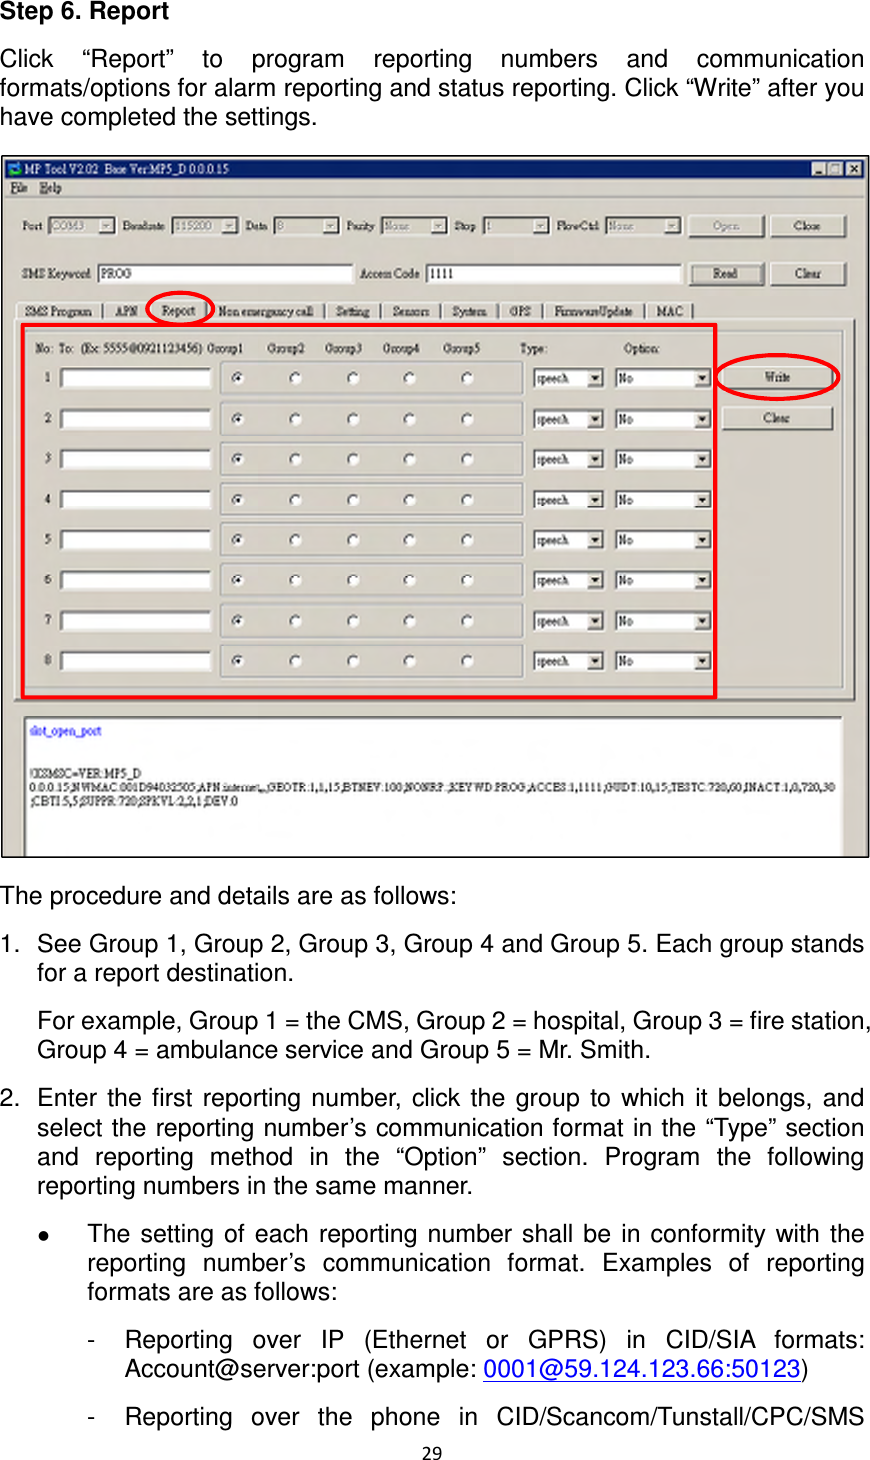 29  Step 6. Report Click  “Report”  to  program  reporting  numbers  and  communication formats/options for alarm reporting and status reporting. Click “Write” after you have completed the settings.  The procedure and details are as follows: 1.  See Group 1, Group 2, Group 3, Group 4 and Group 5. Each group stands for a report destination.   For example, Group 1 = the CMS, Group 2 = hospital, Group 3 = fire station, Group 4 = ambulance service and Group 5 = Mr. Smith. 2.  Enter  the first  reporting number,  click the  group  to  which  it  belongs,  and select the reporting number’s communication format in the “Type” section and  reporting  method  in  the  “Option”  section.  Program  the  following reporting numbers in the same manner.    The  setting  of  each  reporting  number shall be  in  conformity  with  the reporting  number’s  communication  format.  Examples  of  reporting formats are as follows: -  Reporting  over  IP  (Ethernet  or  GPRS)  in  CID/SIA  formats: Account@server:port (example: 0001@59.124.123.66:50123) -  Reporting  over  the  phone  in  CID/Scancom/Tunstall/CPC/SMS 